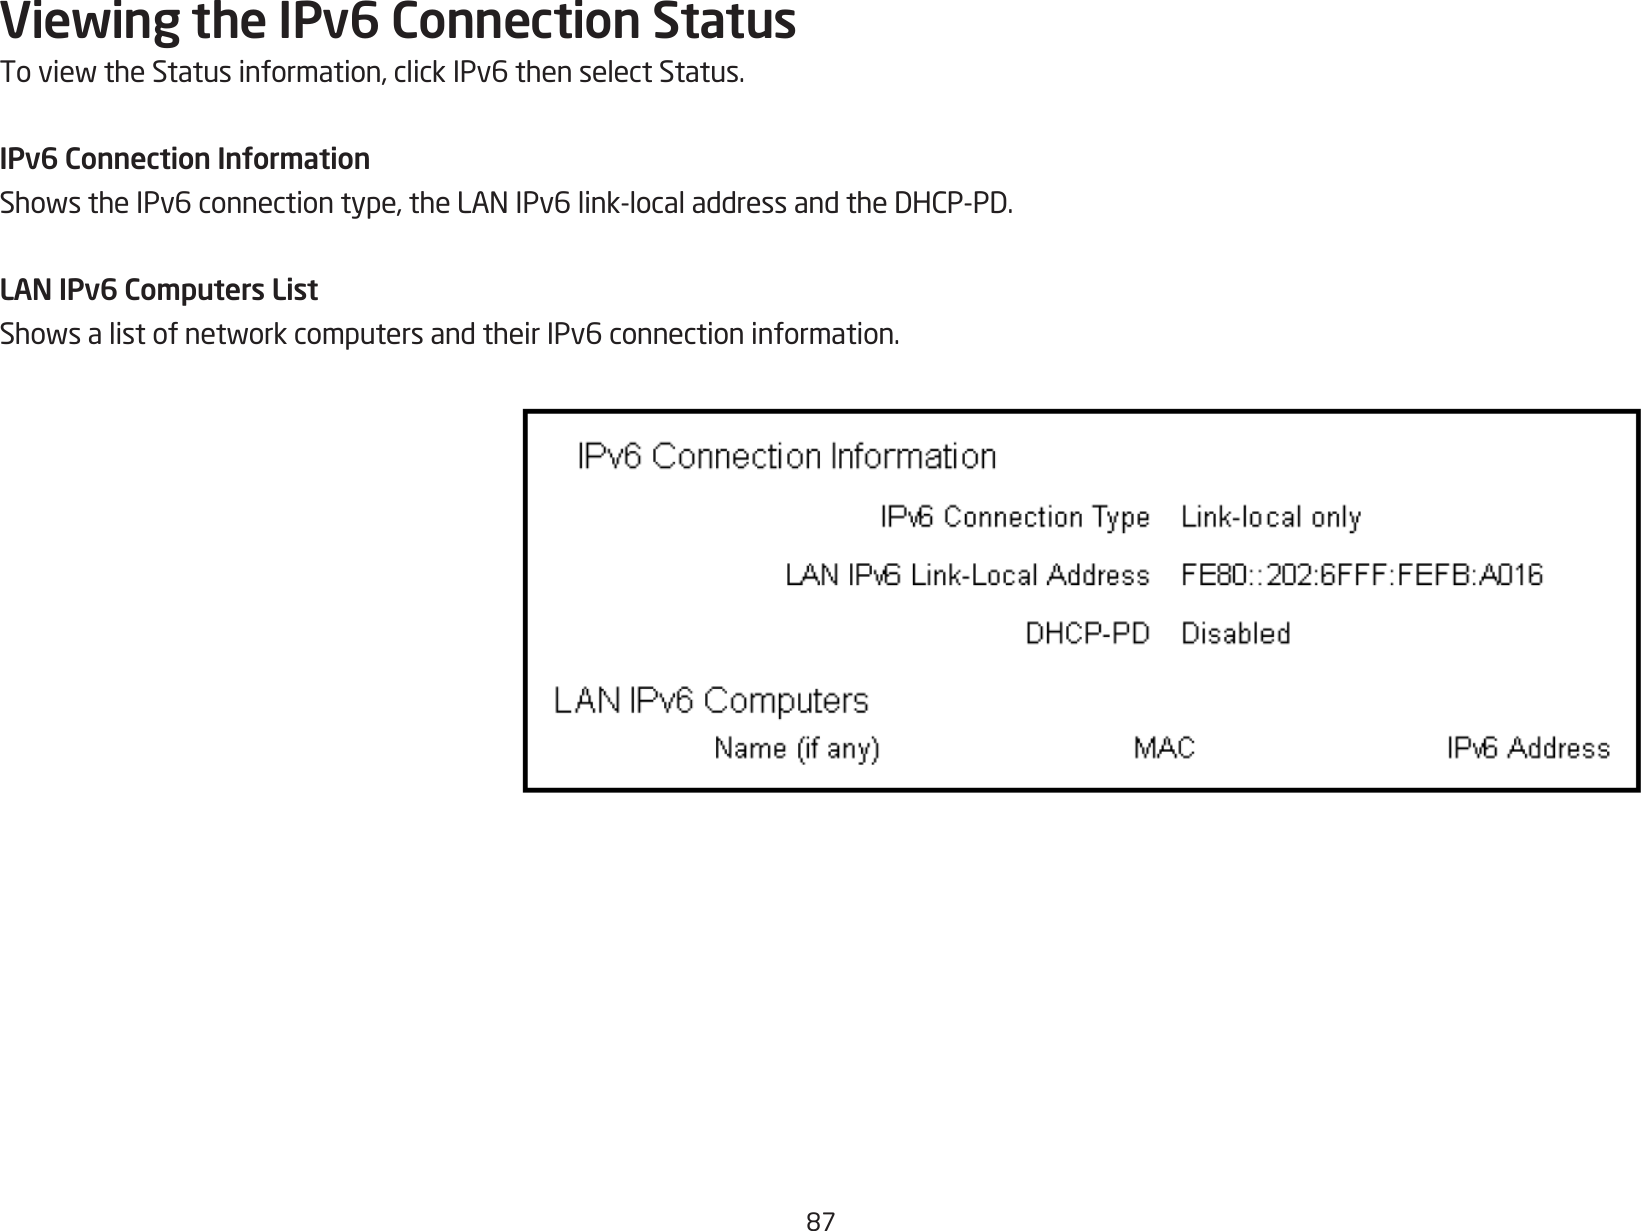 87Viewing the IPv6 Connection StatusToviewtheStatusinformation,clickIPv6thenselectStatus.IPv6 Connection InformationShowstheIPv6connectiontype,theLANIPv6link-localaddressandtheDHCP-PD.LAN IPv6 Computers ListShowsalistofnetworkcomputersandtheirIPv6connectioninformation.